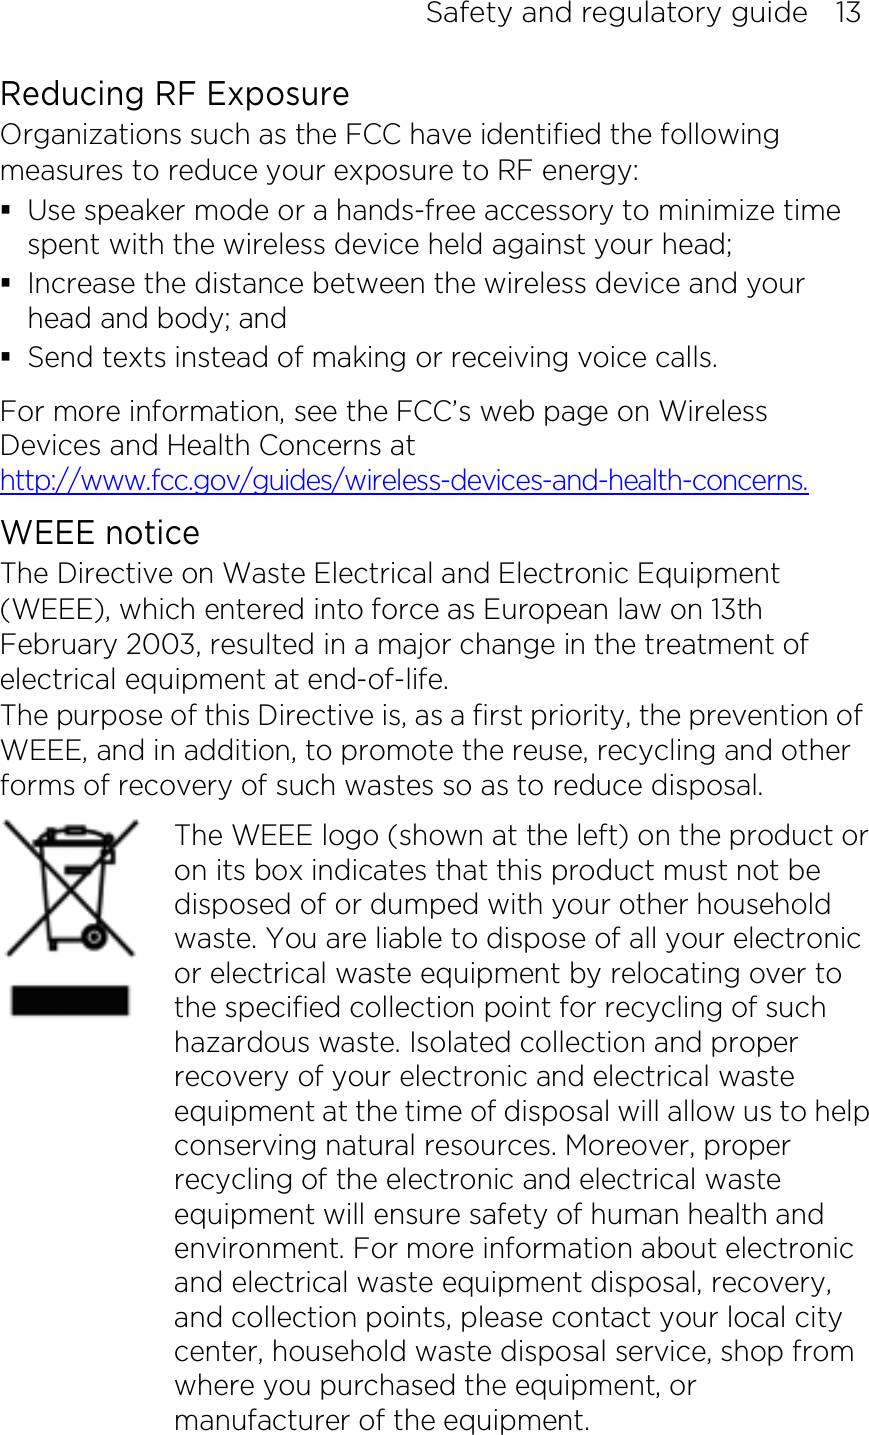 Safety and regulatory guide    13 Reducing RF Exposure   Organizations such as the FCC have identified the following measures to reduce your exposure to RF energy:  Use speaker mode or a hands-free accessory to minimize time spent with the wireless device held against your head;    Increase the distance between the wireless device and your head and body; and  Send texts instead of making or receiving voice calls. For more information, see the FCC’s web page on Wireless Devices and Health Concerns at http://www.fcc.gov/guides/wireless-devices-and-health-concerns. WEEE notice The Directive on Waste Electrical and Electronic Equipment (WEEE), which entered into force as European law on 13th February 2003, resulted in a major change in the treatment of electrical equipment at end-of-life.   The purpose of this Directive is, as a first priority, the prevention of WEEE, and in addition, to promote the reuse, recycling and other forms of recovery of such wastes so as to reduce disposal.     The WEEE logo (shown at the left) on the product or on its box indicates that this product must not be disposed of or dumped with your other household waste. You are liable to dispose of all your electronic or electrical waste equipment by relocating over to the specified collection point for recycling of such hazardous waste. Isolated collection and proper recovery of your electronic and electrical waste equipment at the time of disposal will allow us to help conserving natural resources. Moreover, proper recycling of the electronic and electrical waste equipment will ensure safety of human health and environment. For more information about electronic and electrical waste equipment disposal, recovery, and collection points, please contact your local city center, household waste disposal service, shop from where you purchased the equipment, or manufacturer of the equipment.  